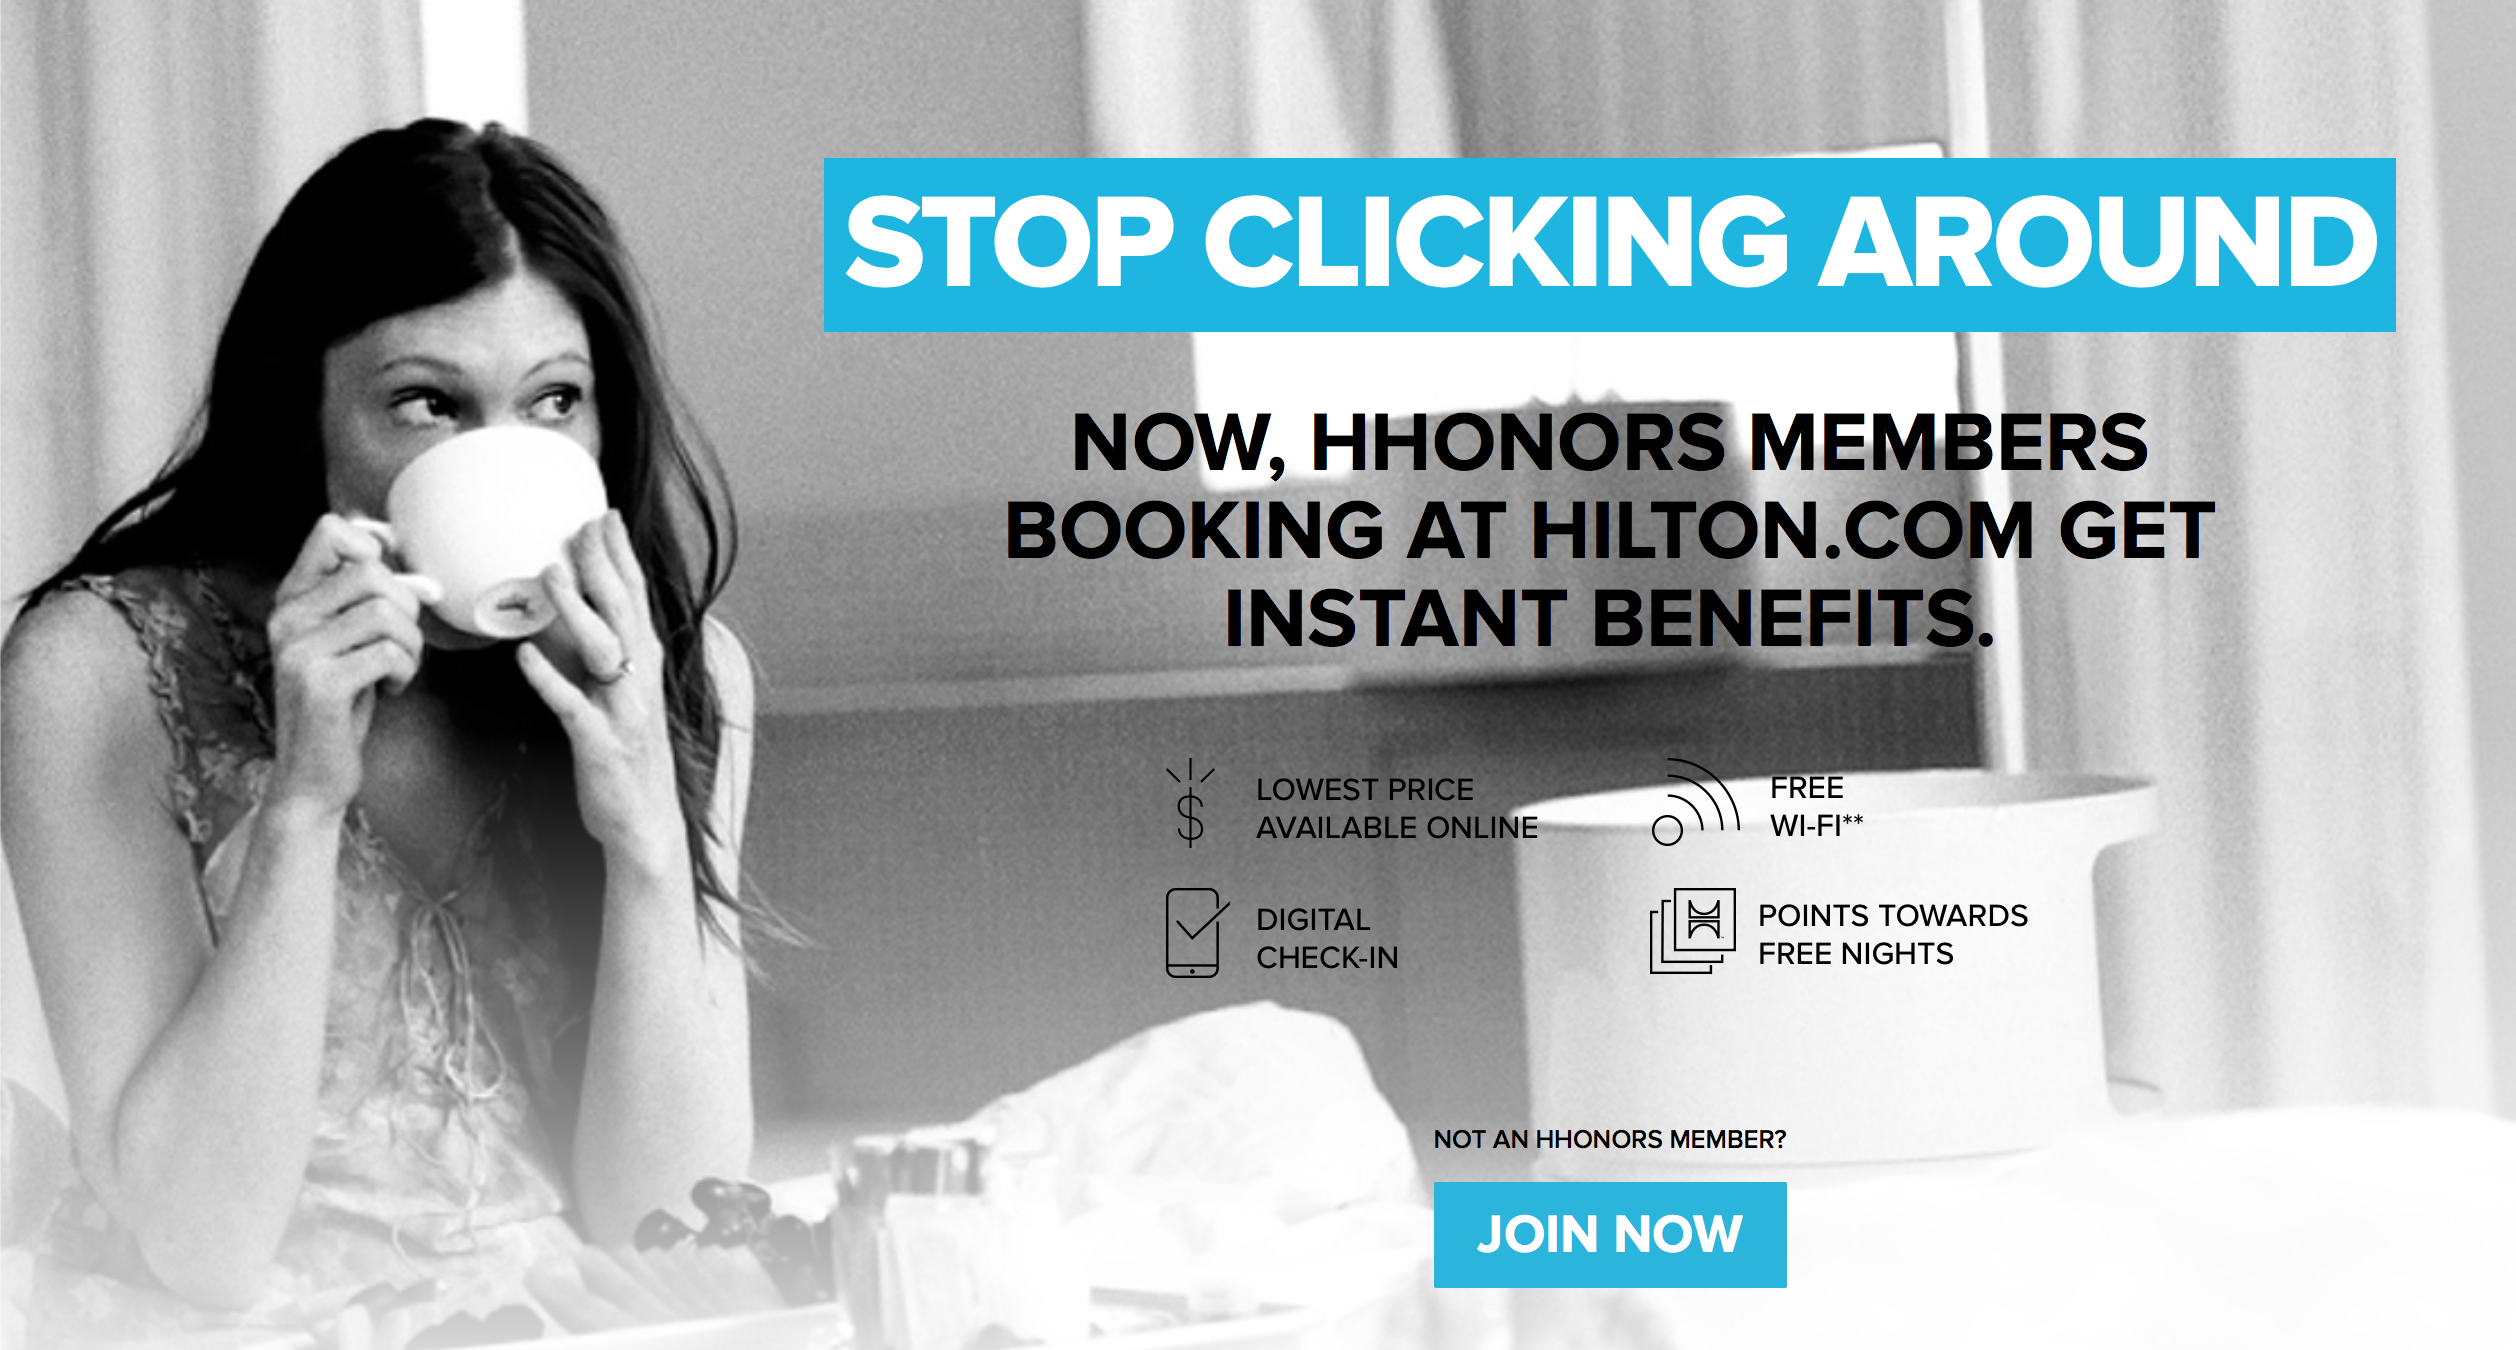 Stop Clicking Around discount for Hilton HHonors members